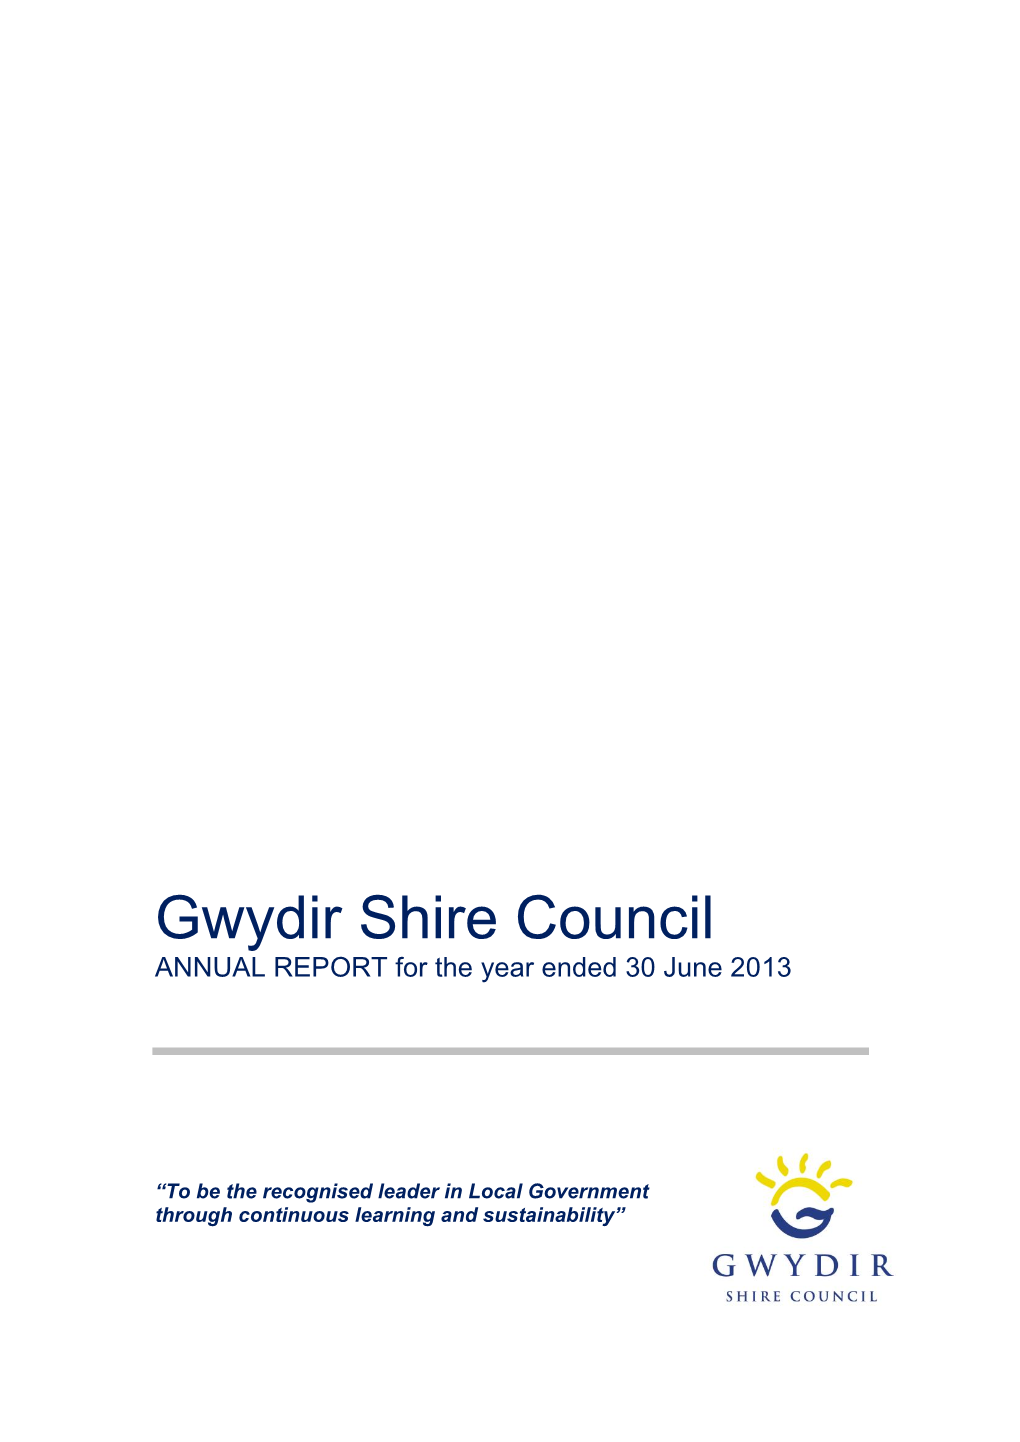 ANNUAL REPORT for the Year Ended 30 June 2013